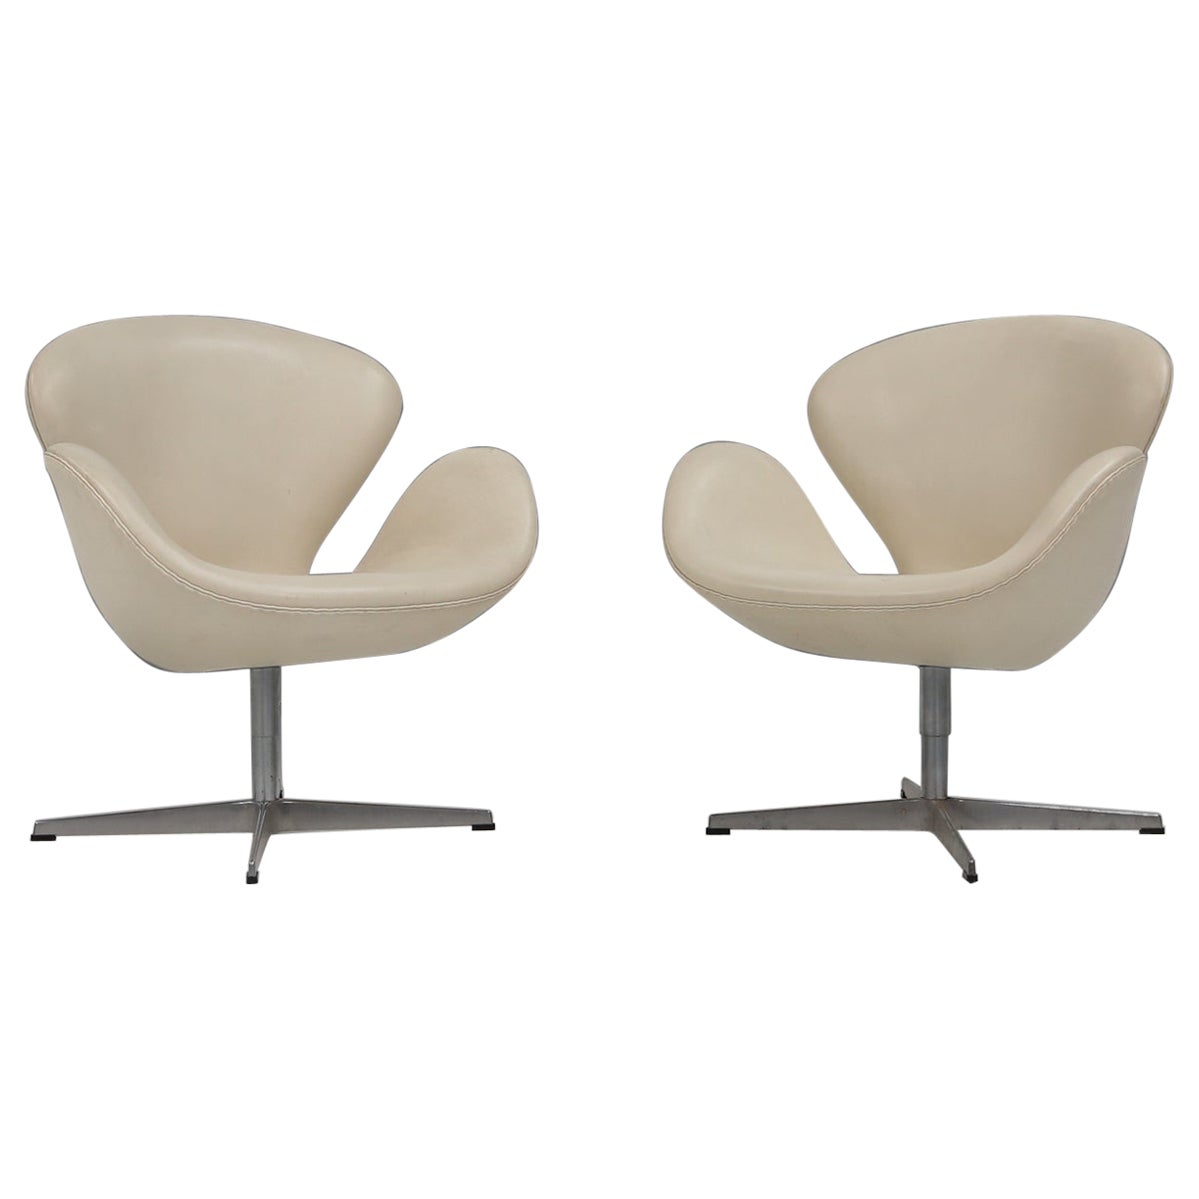 Set of two leather Swan chairs by Arne Jacobsen for Fritz Hansen For Sale